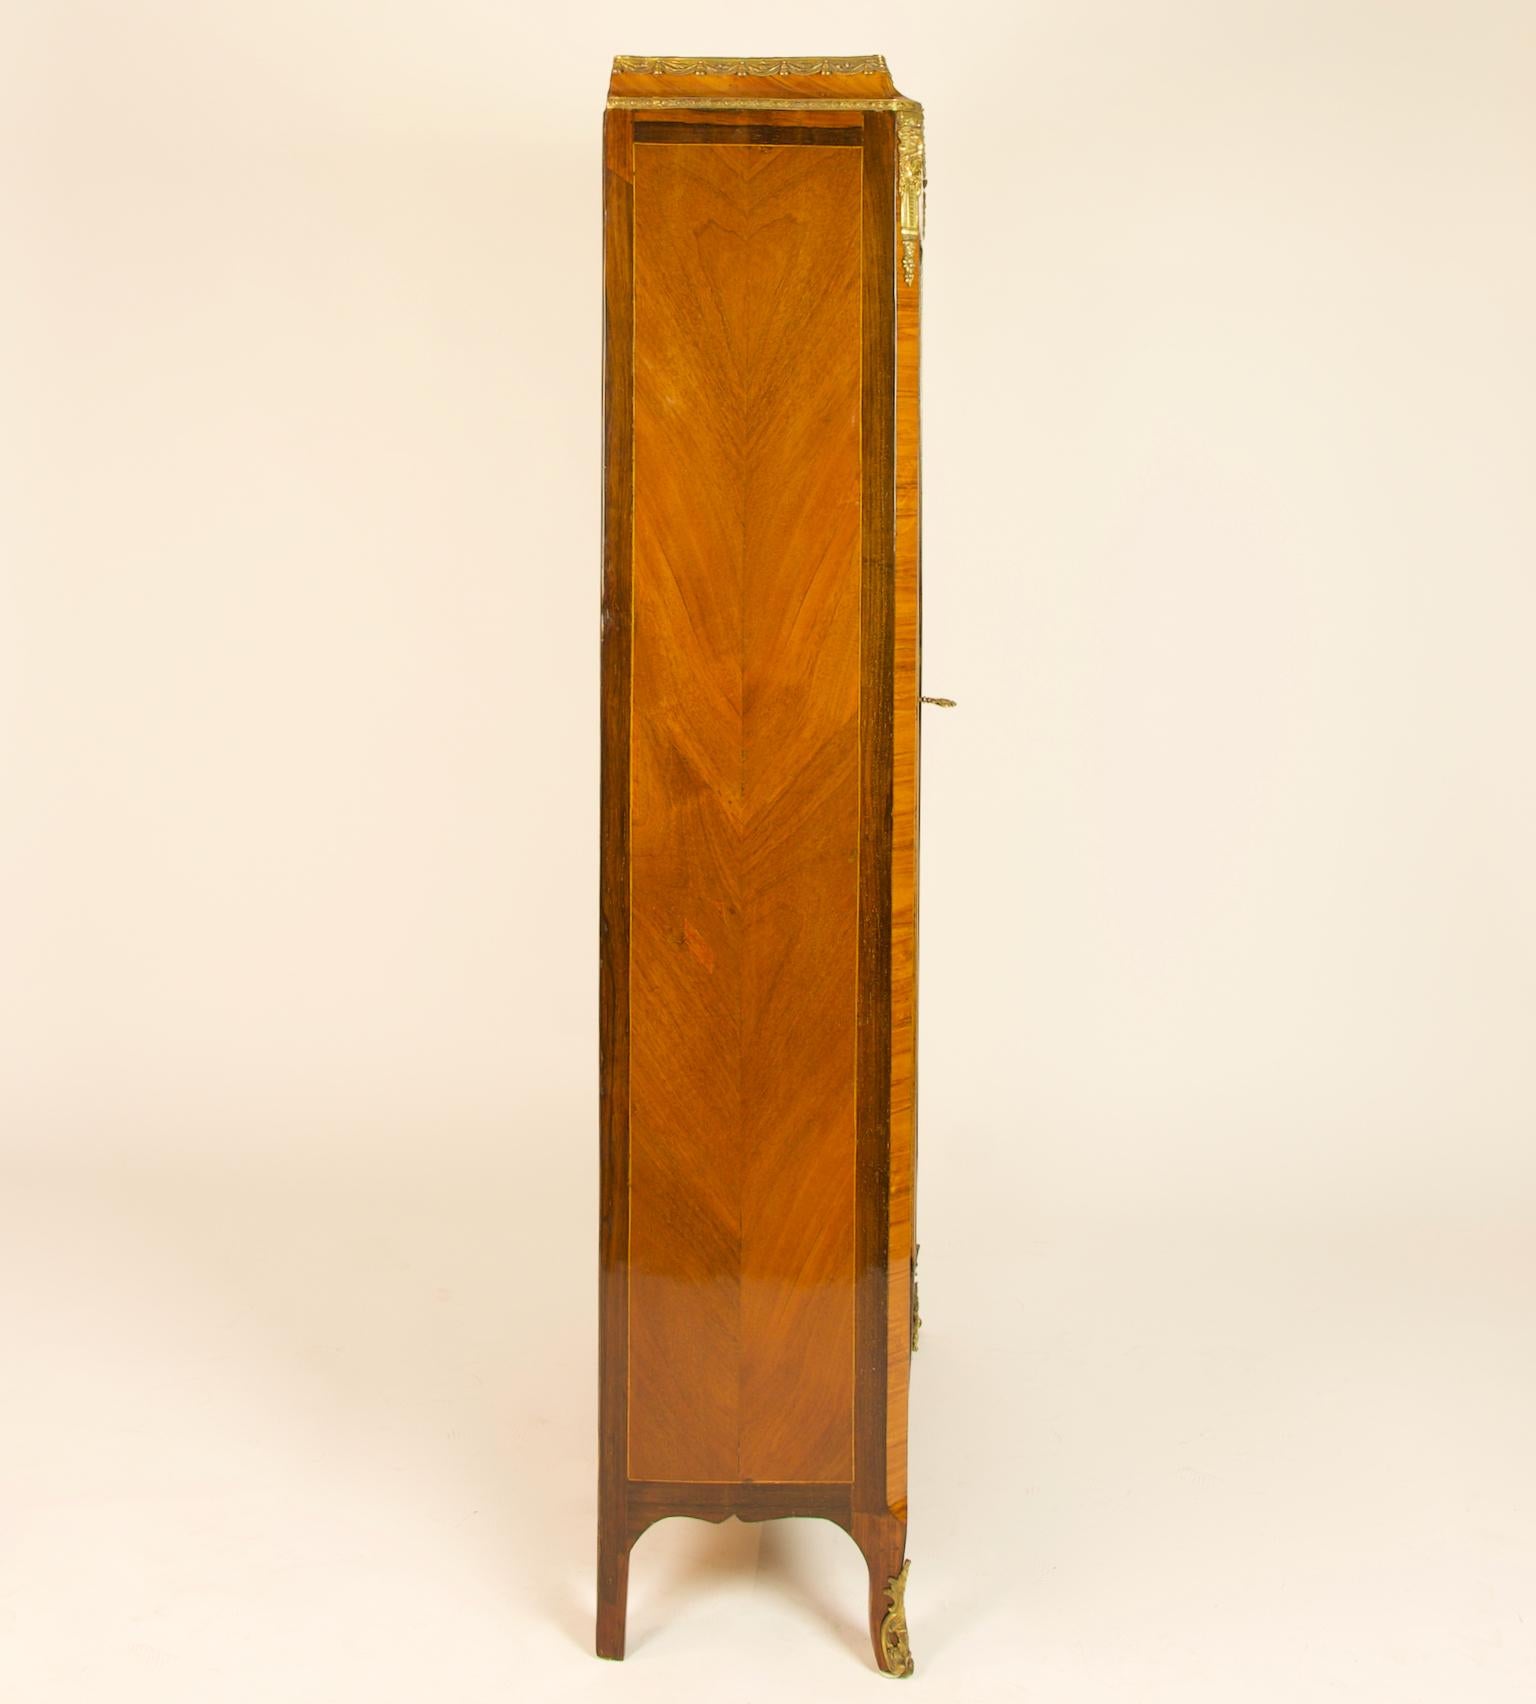 Gilt French 18th Century Louis XV Transition Period Cube Marquetry Vitrine or Library For Sale